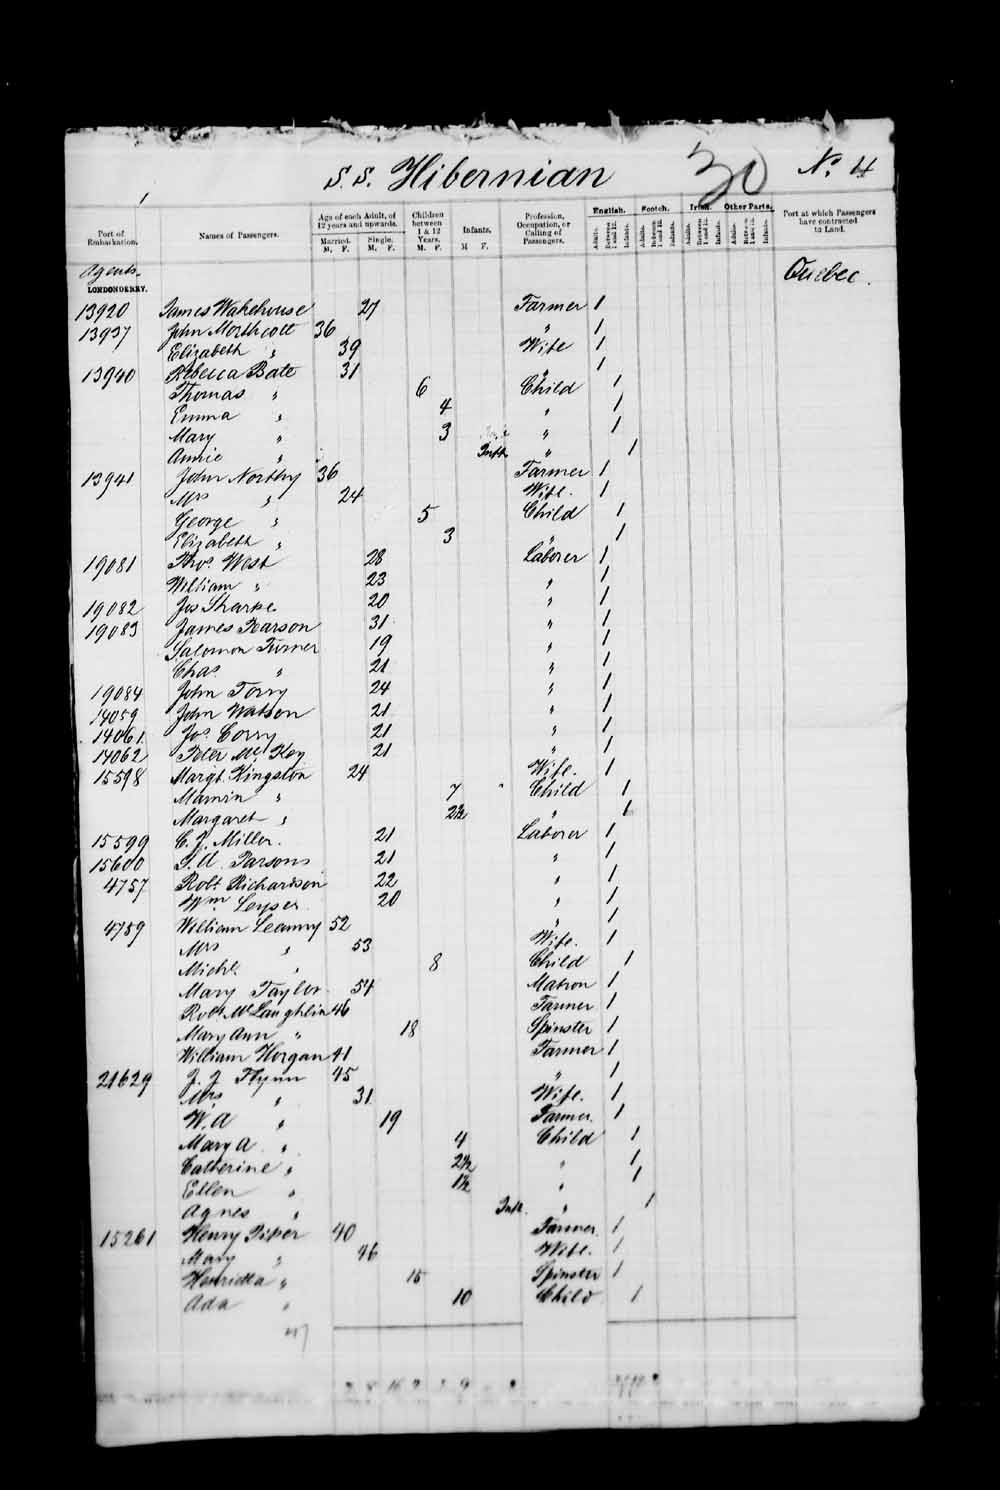 Digitized page of Passenger Lists for Image No.: e003530480